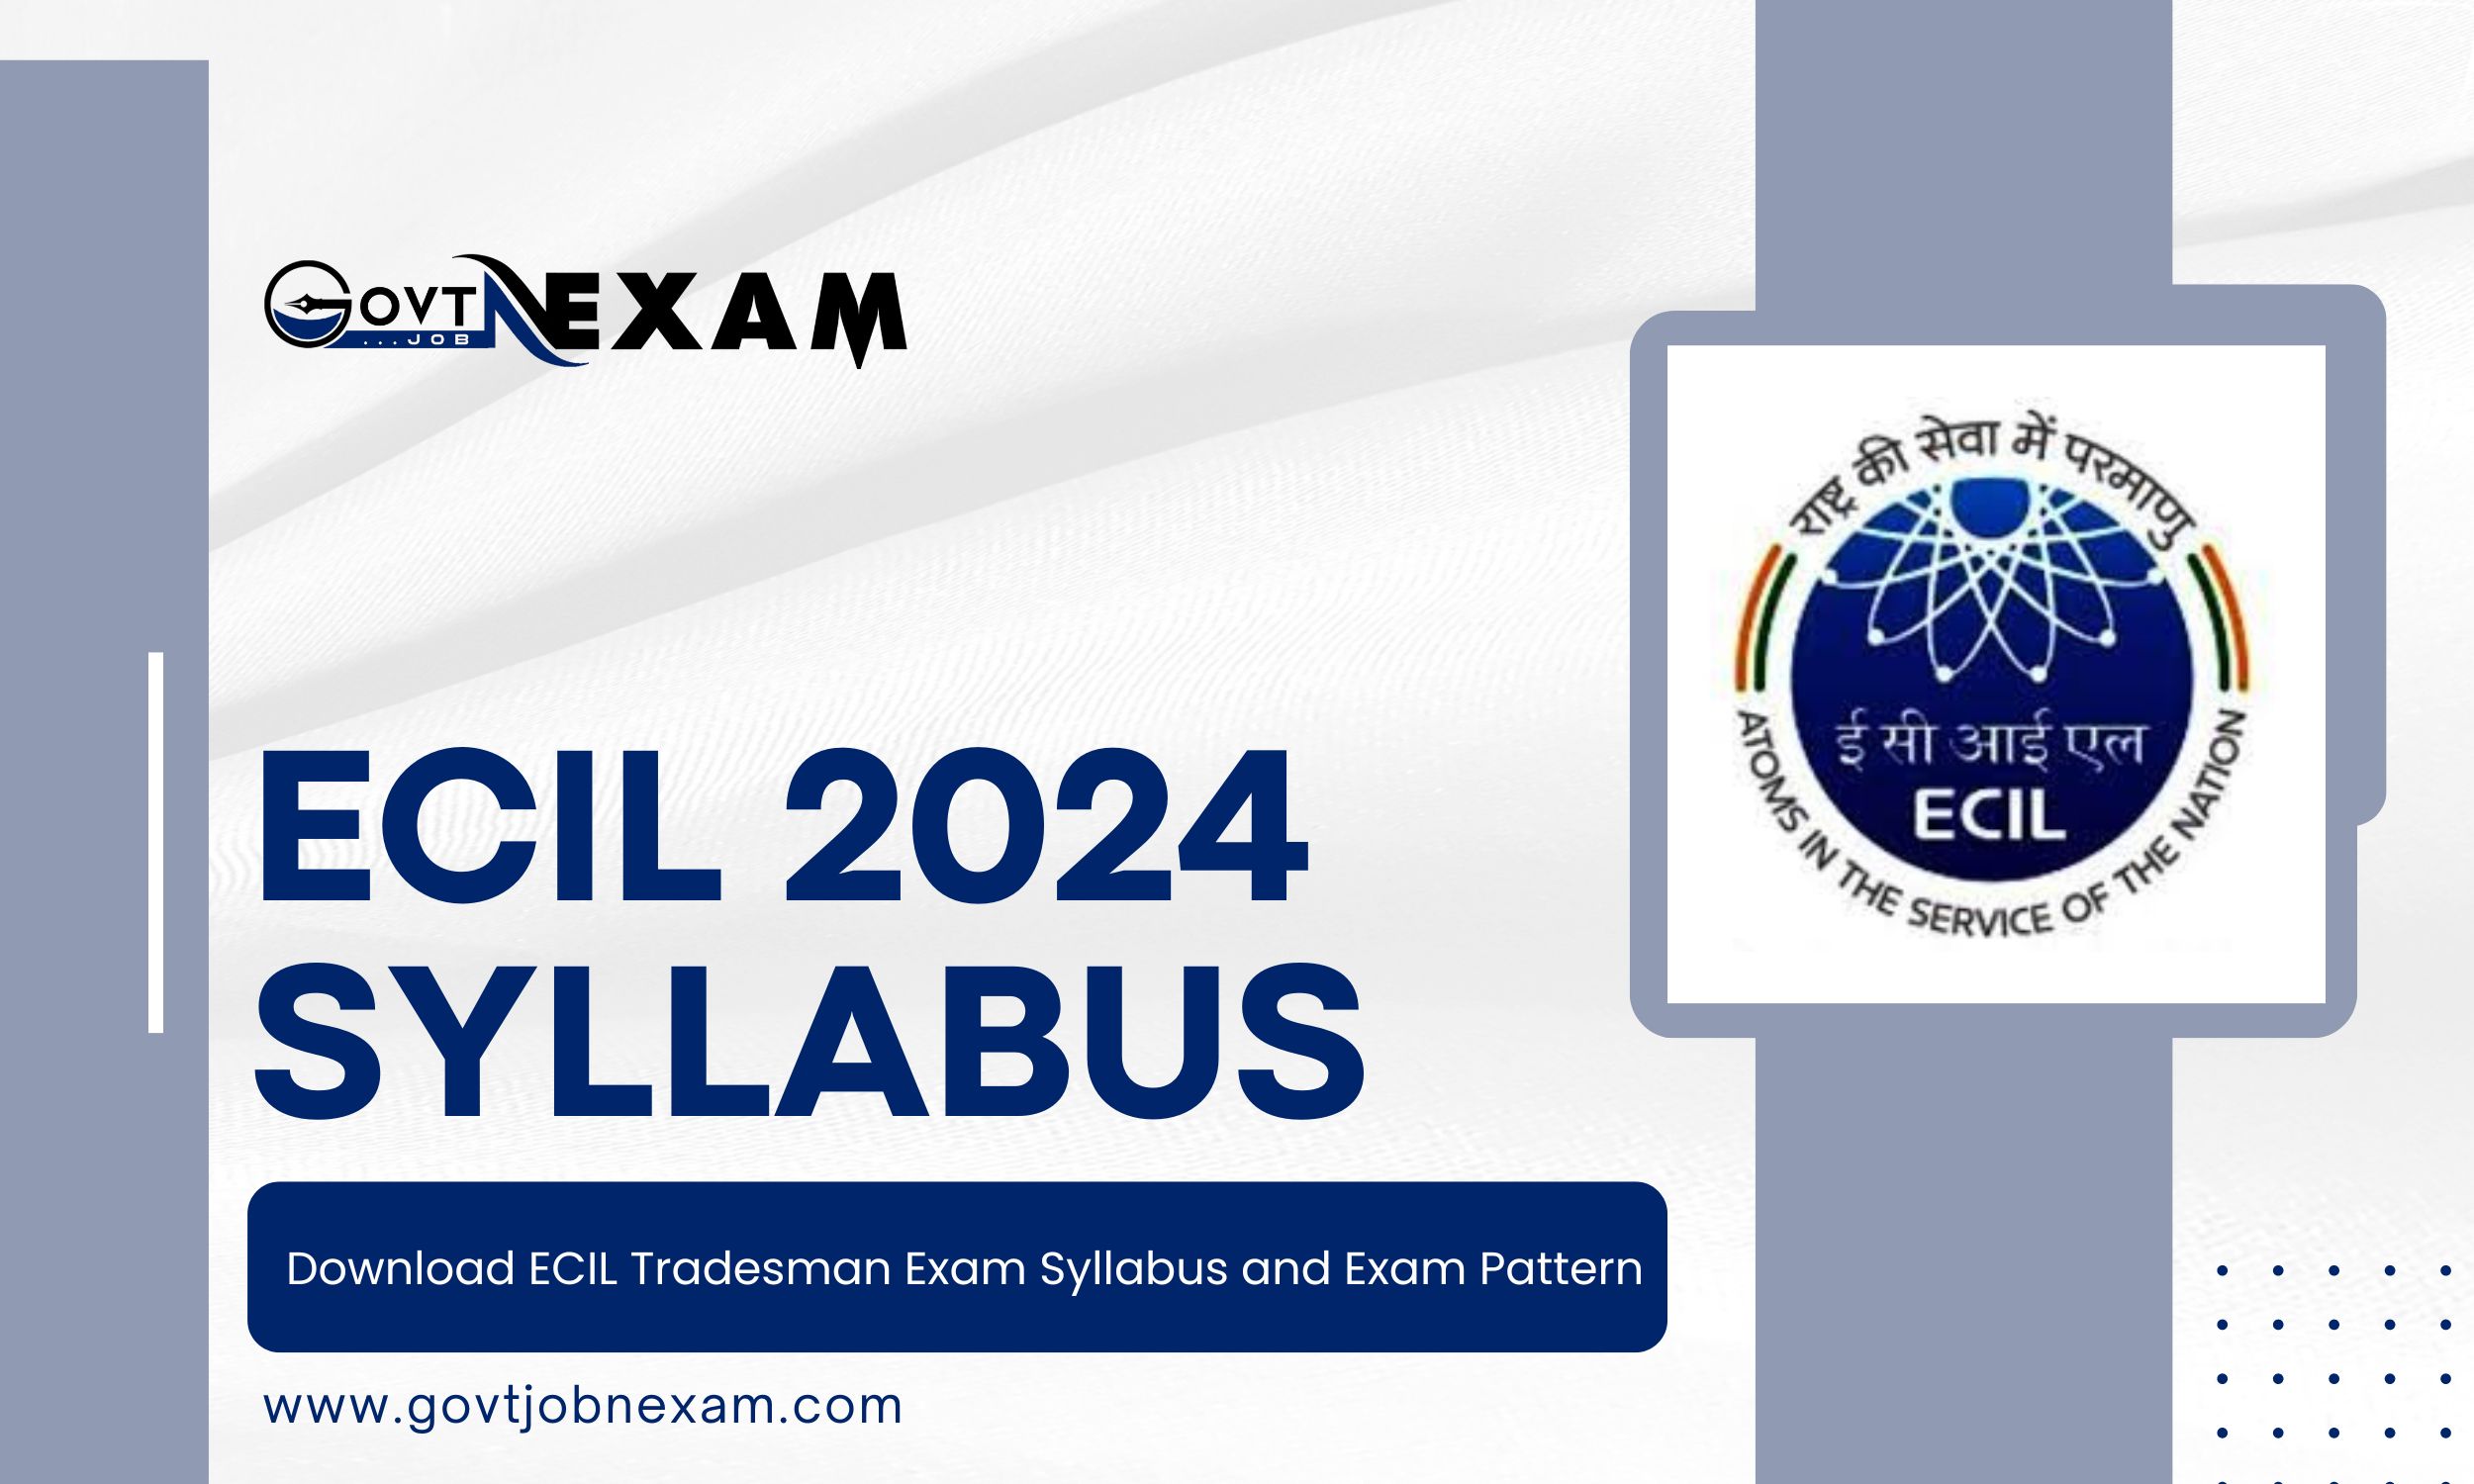 You are currently viewing ECIL Syllabus 2024: Download ECIL Tradesman Exam Syllabus and Exam Pattern